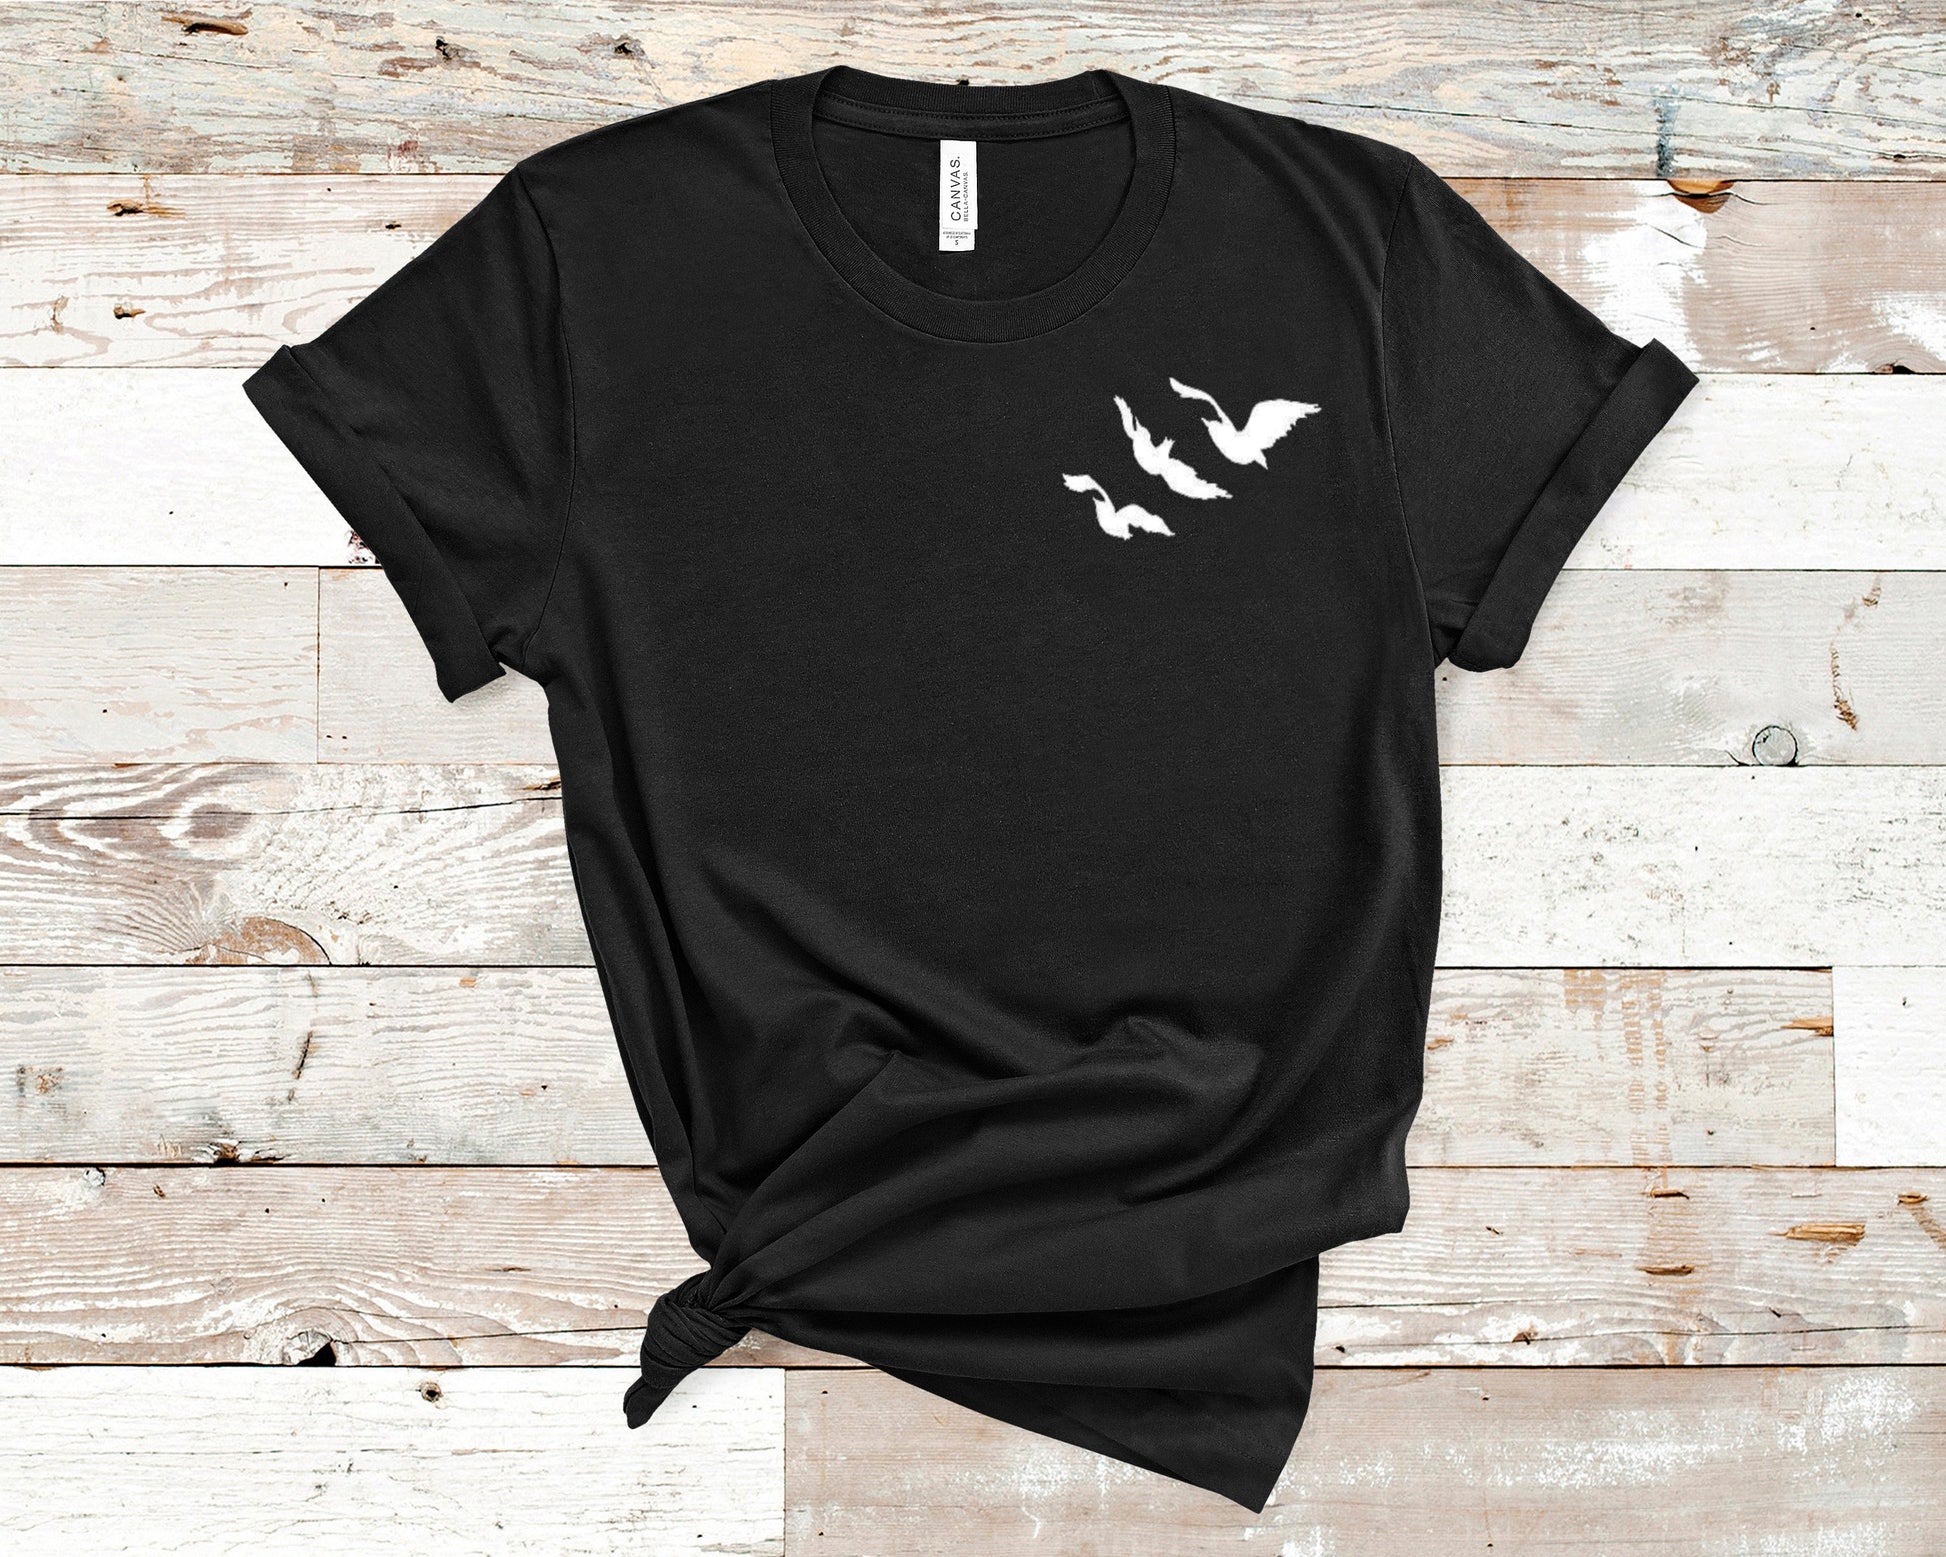 Divergent Ink and Stories Black Shirt